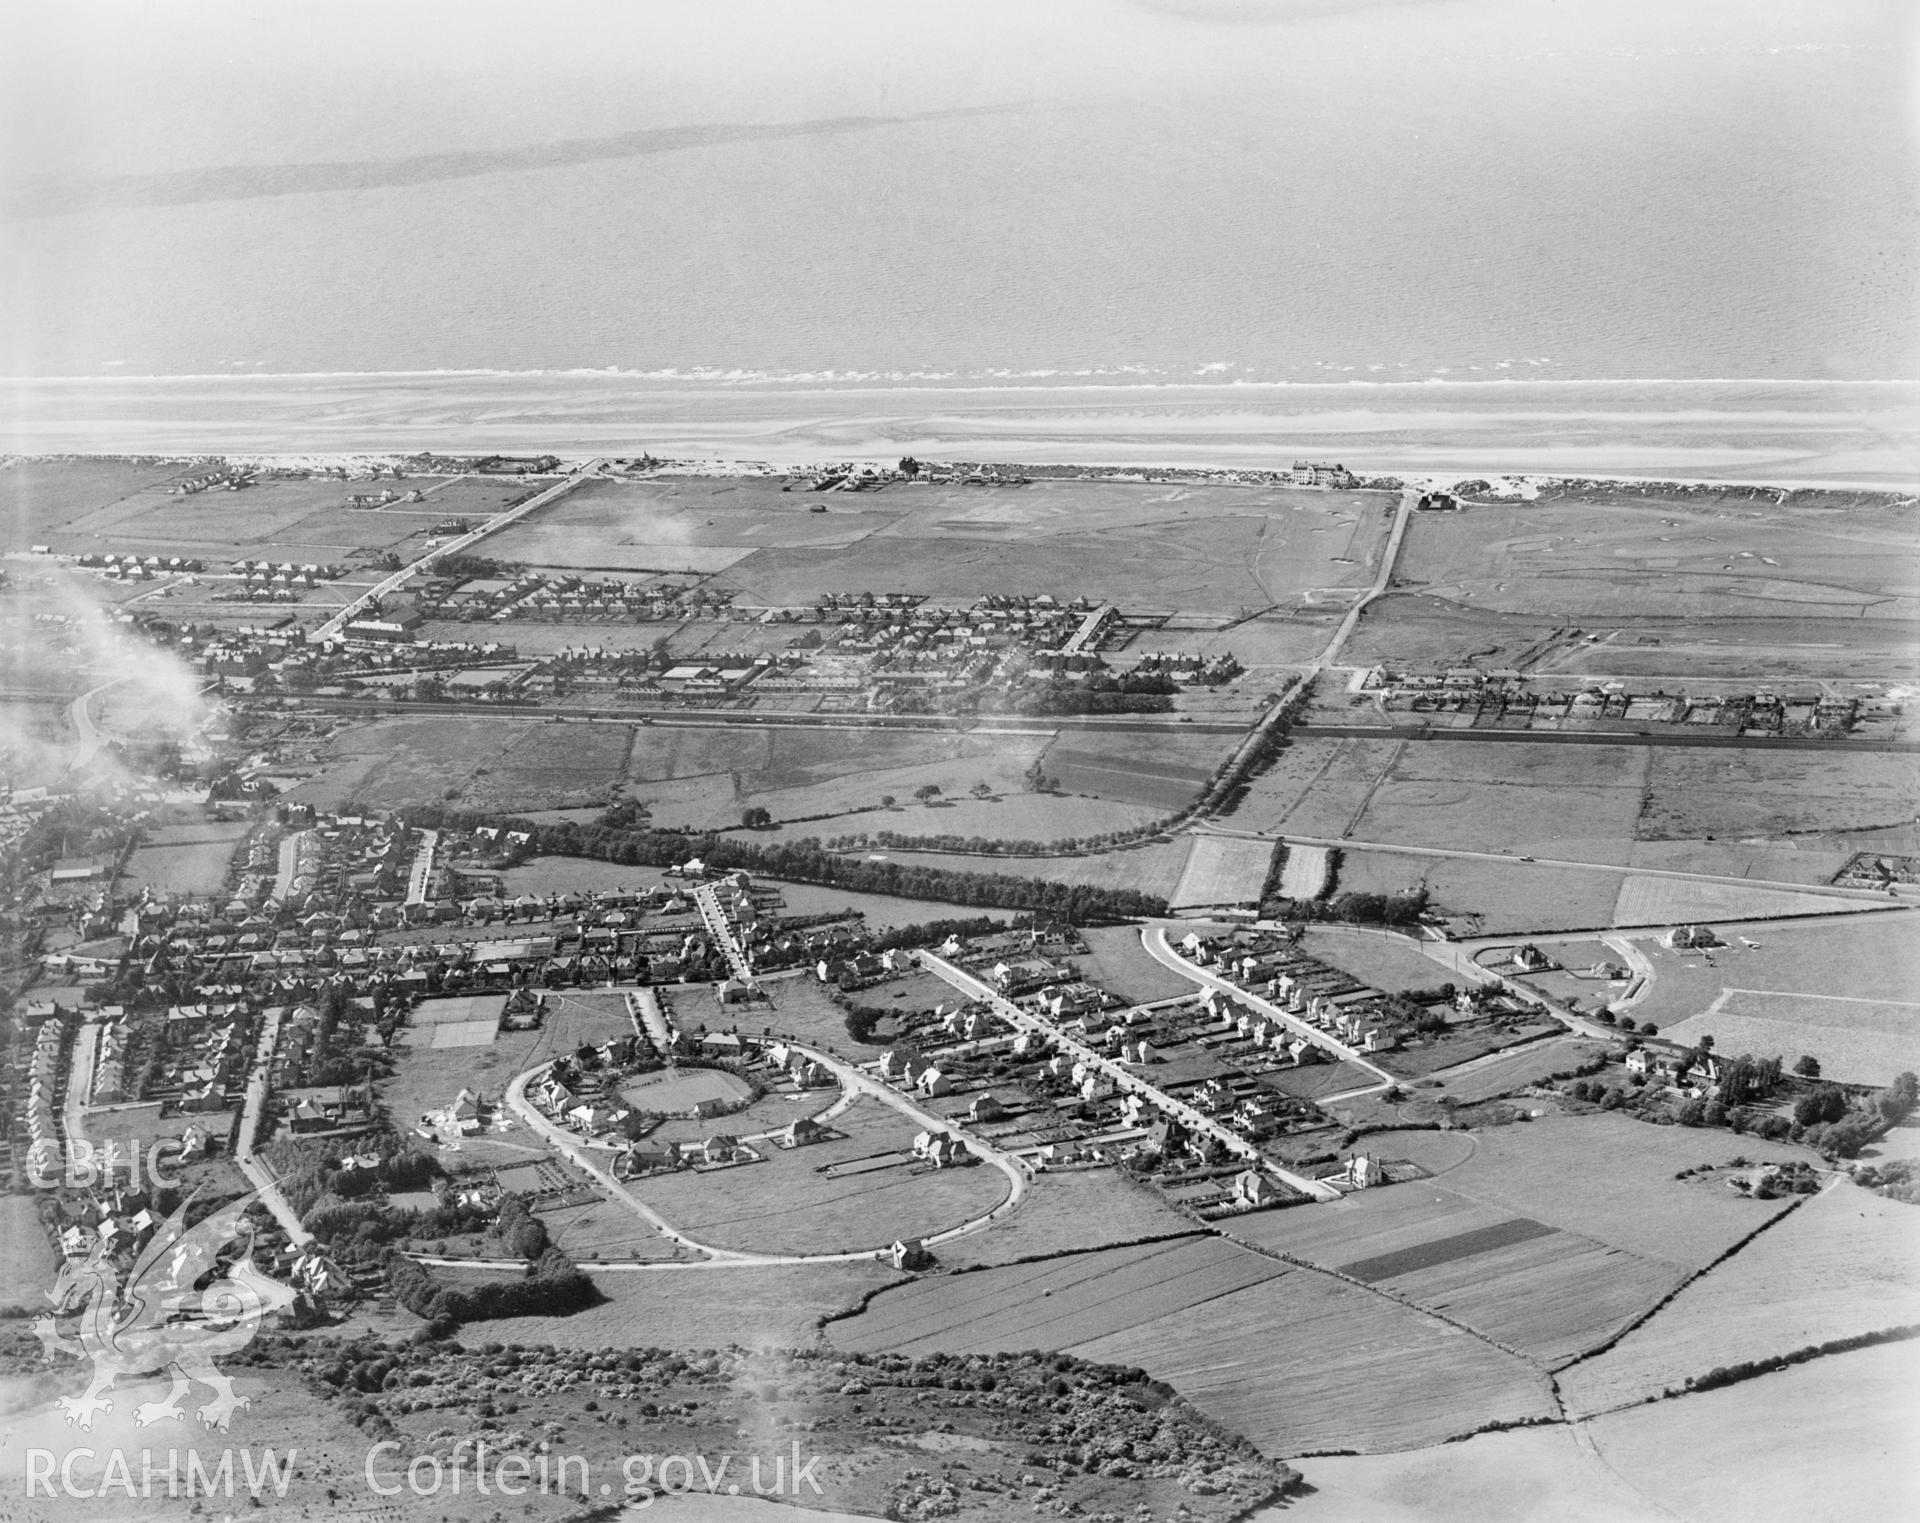 View of Prestatyn showing interwar housing, oblique aerial view. 5?x4? black and white glass plate negative.